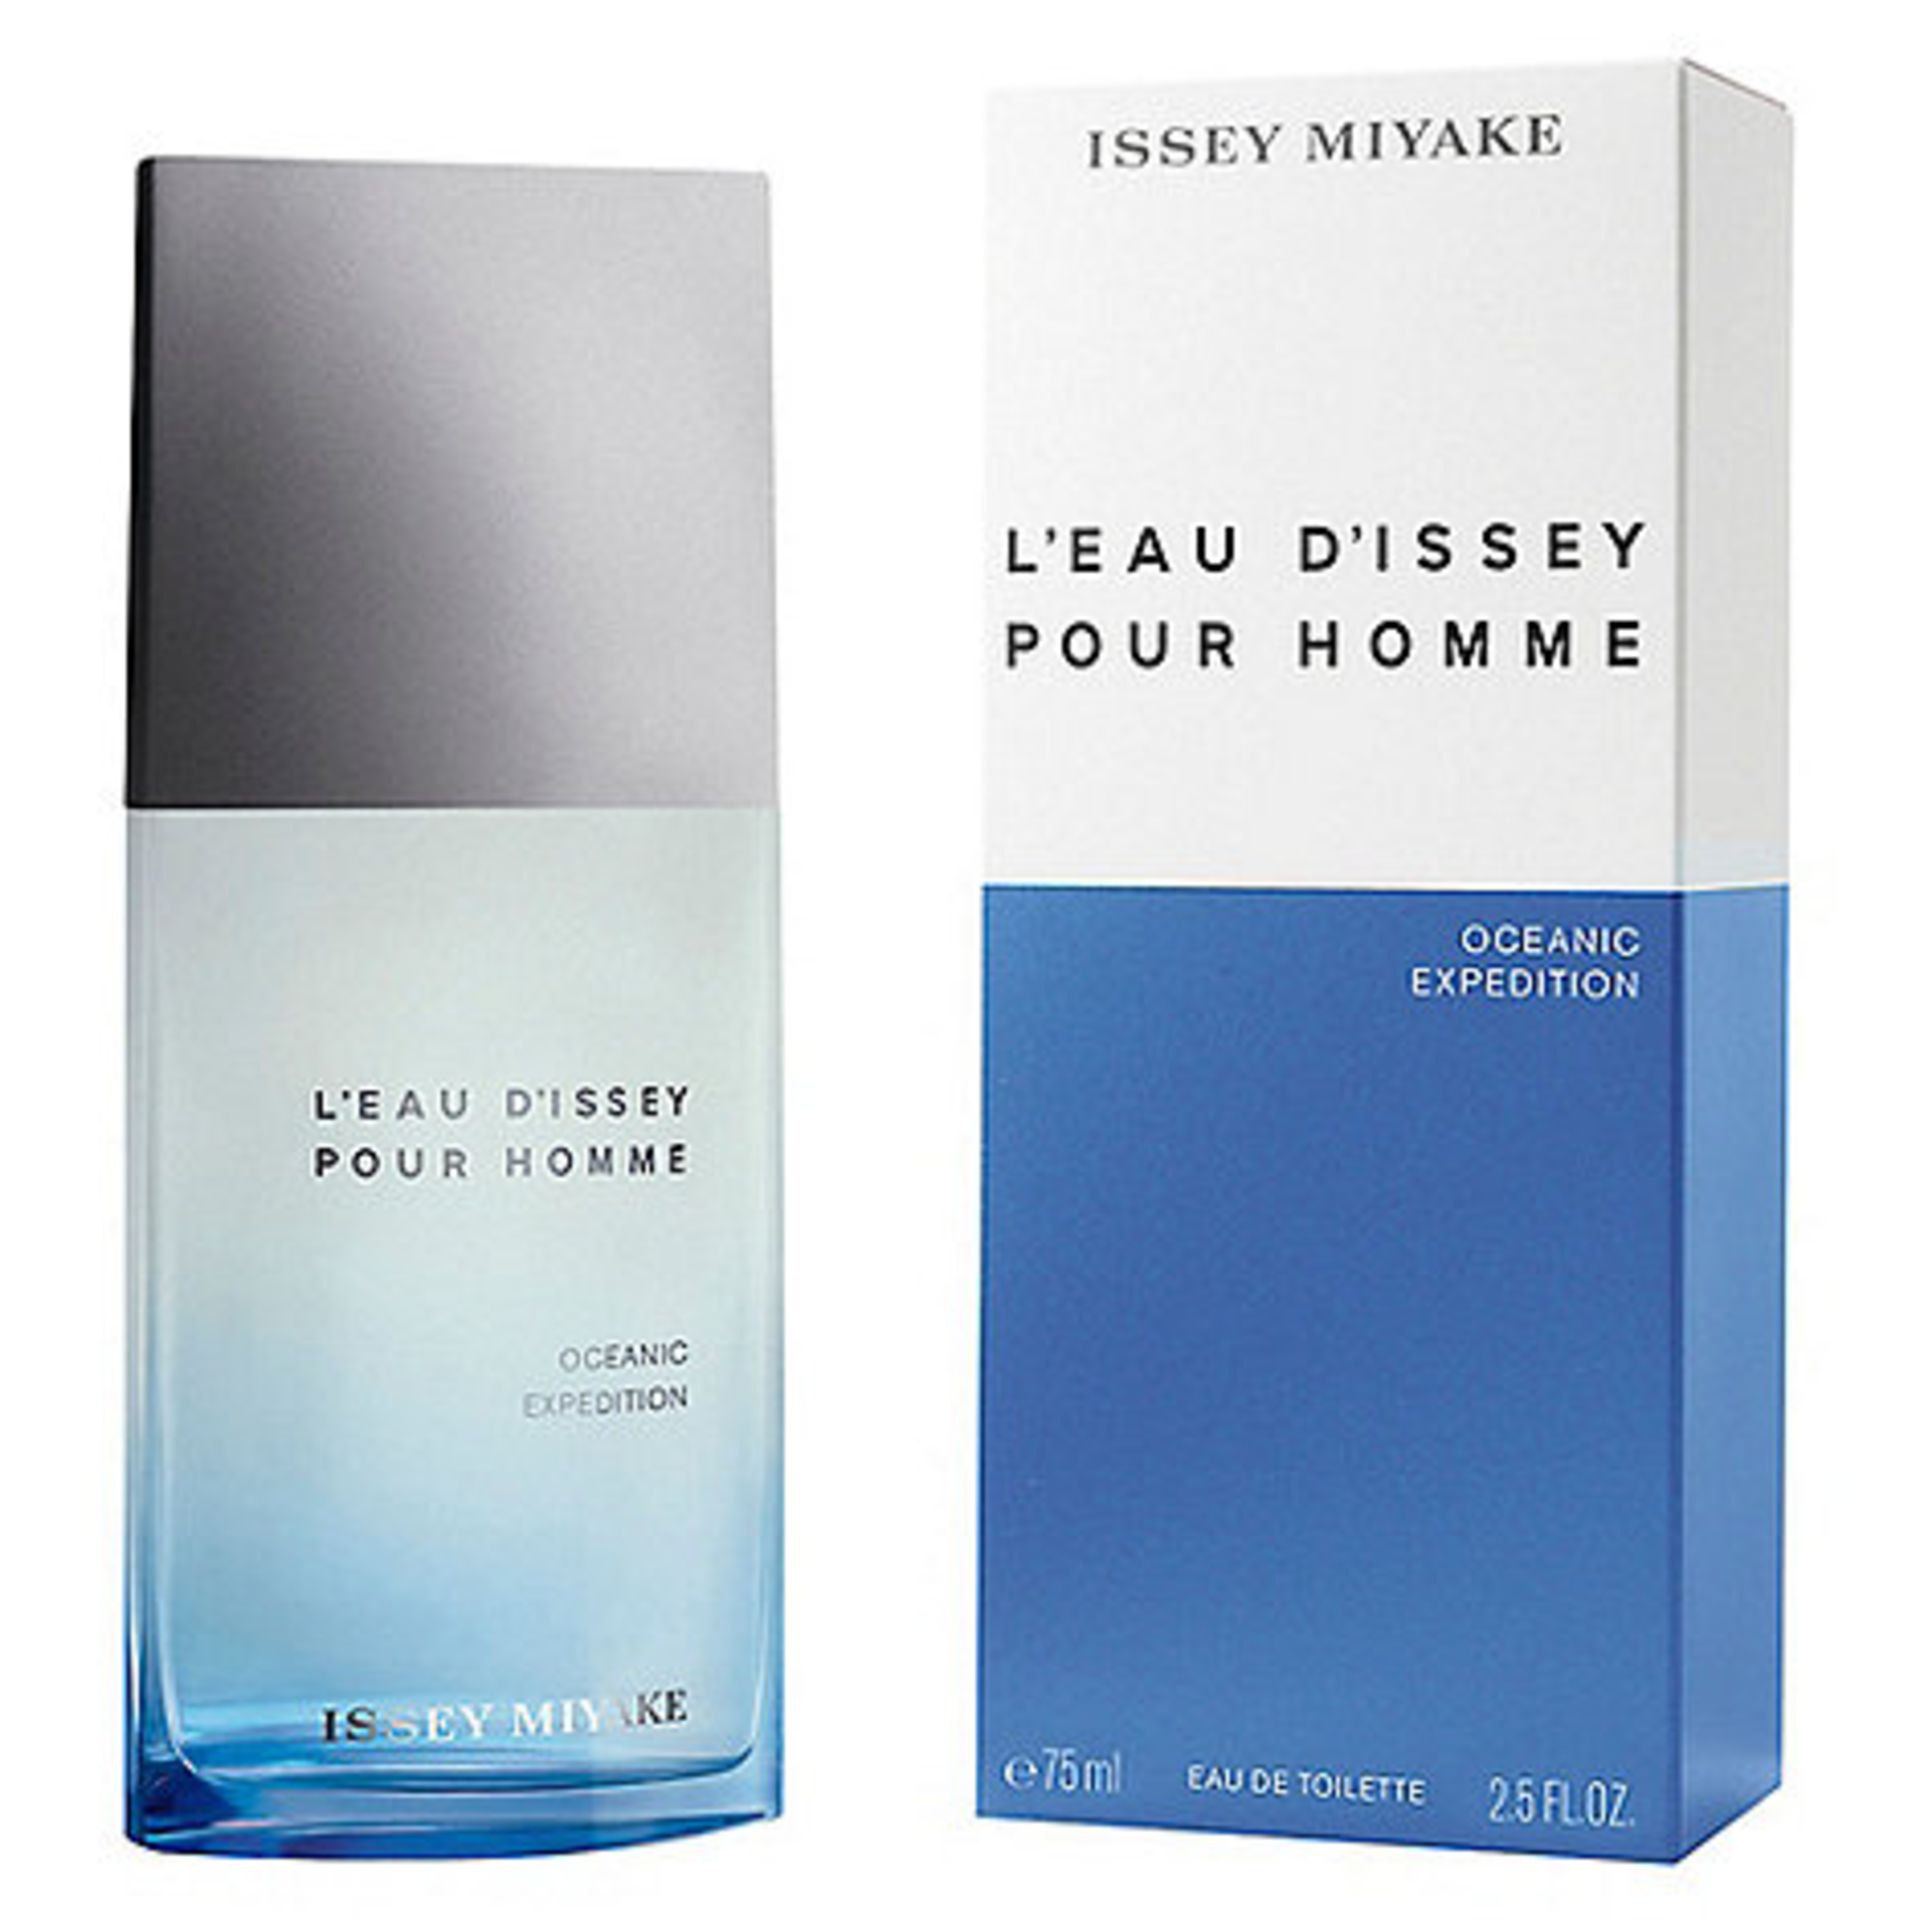 V Brand New Issey Miyake L'eau D'Issey Pour Homme 75ml ISP £41.00